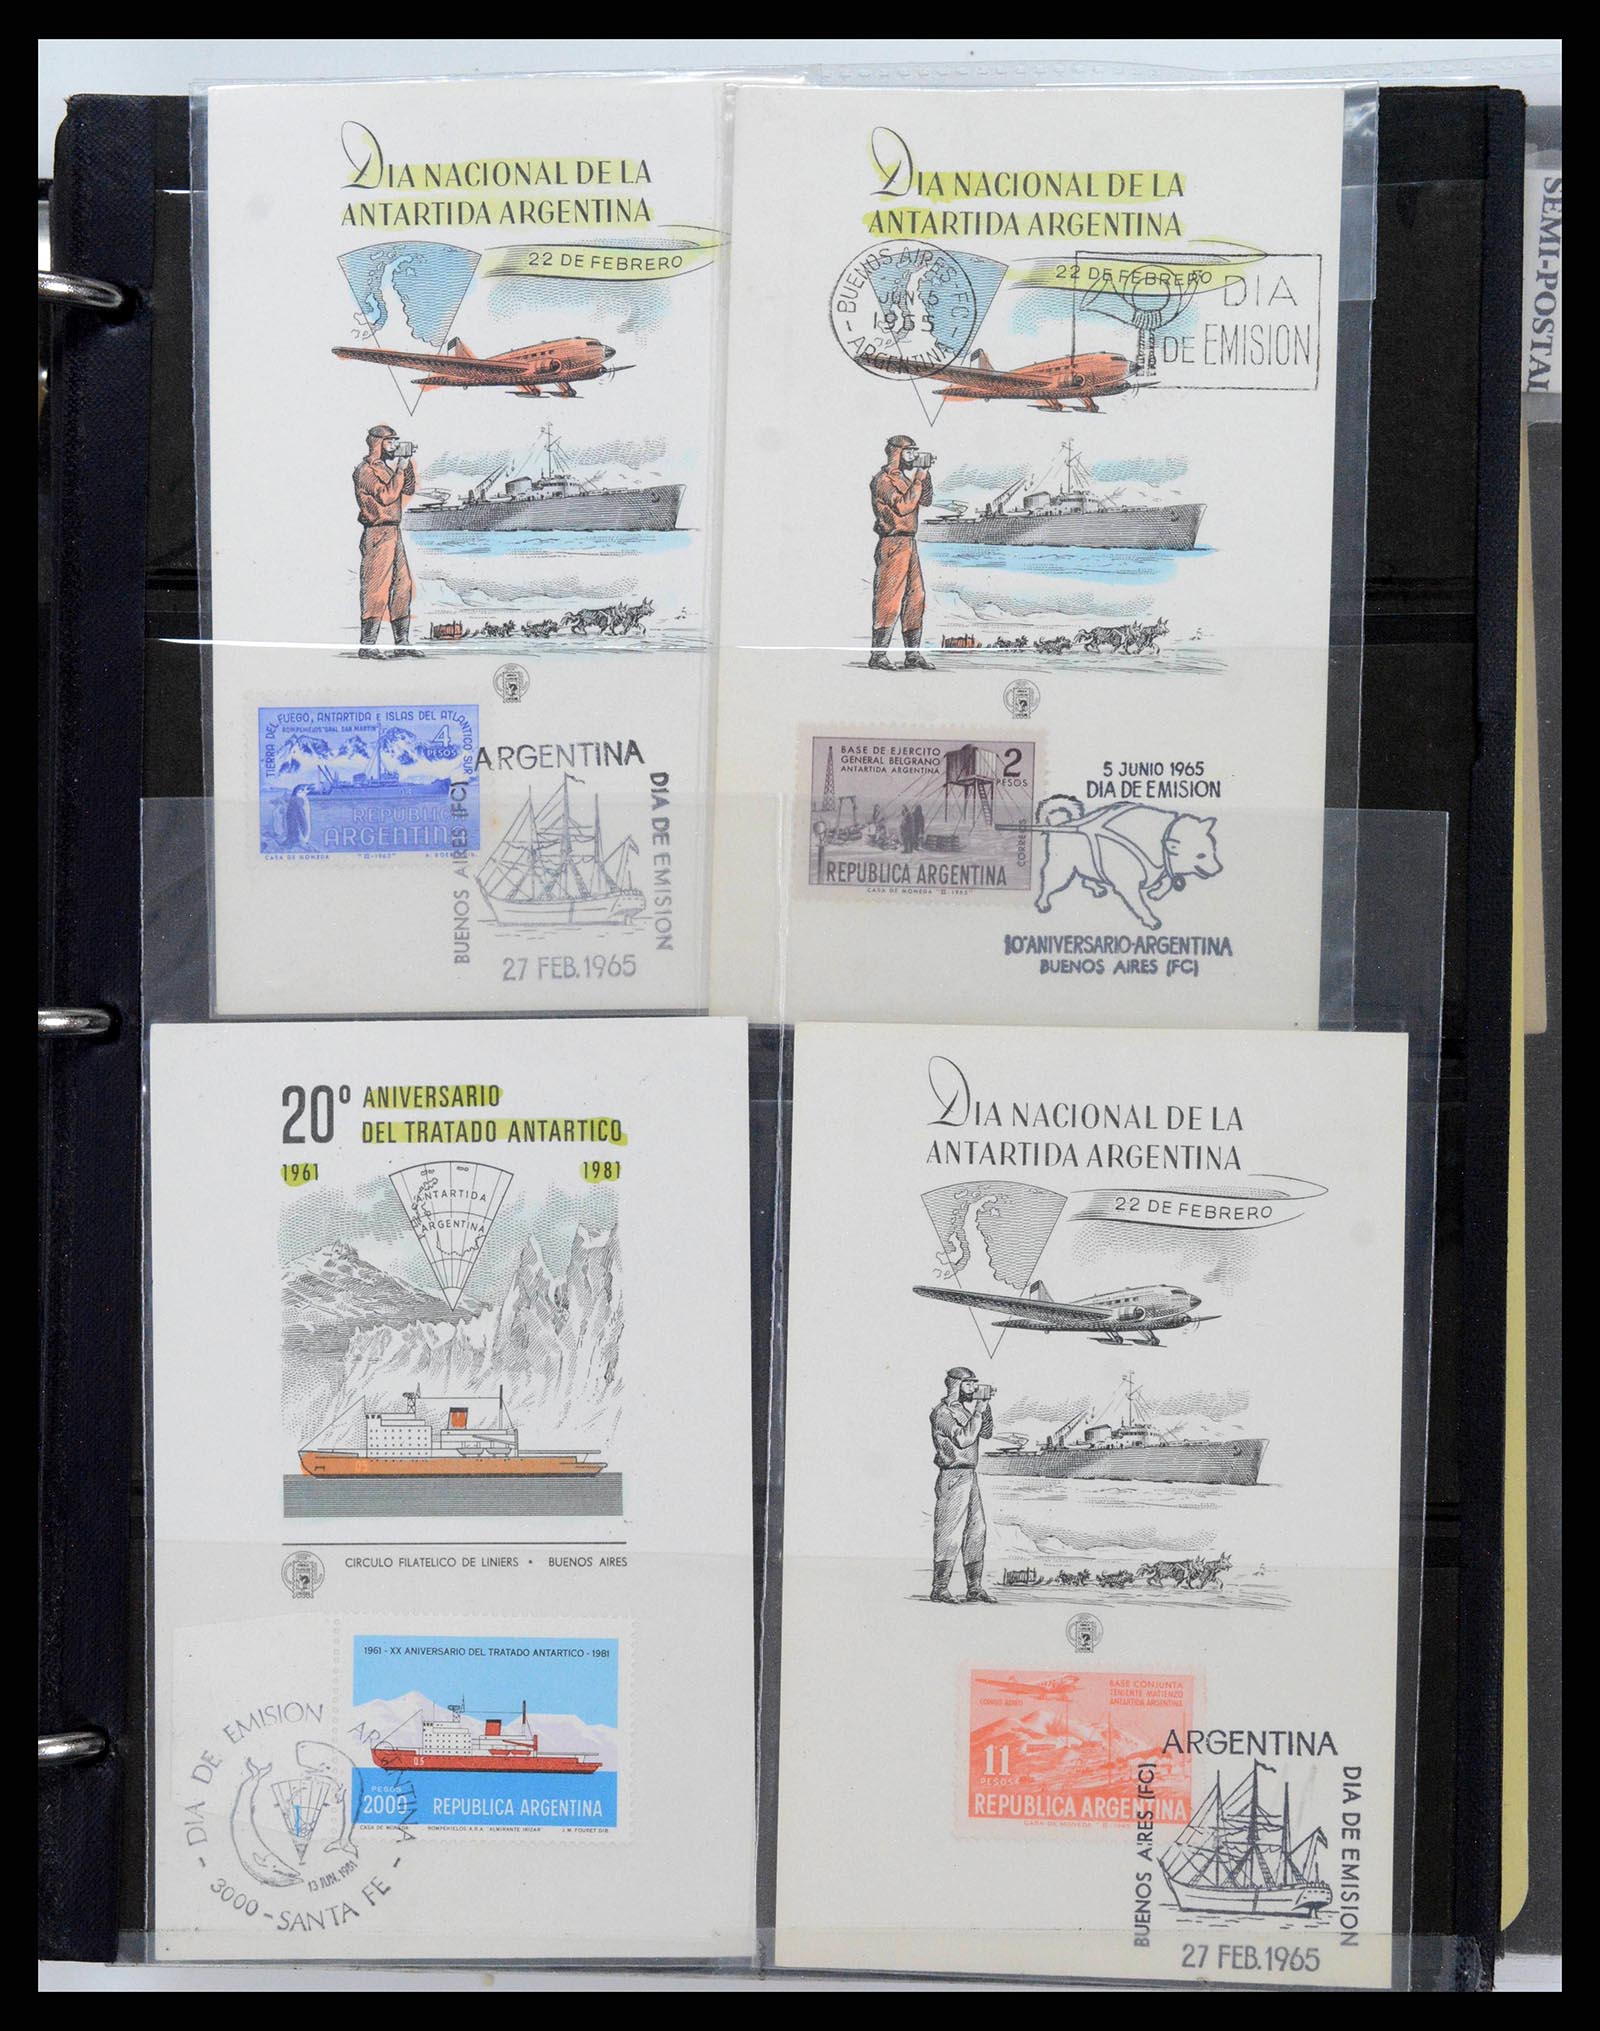 37745 0020 - Stamp collection 37745 Argentina covers 1851-1986.